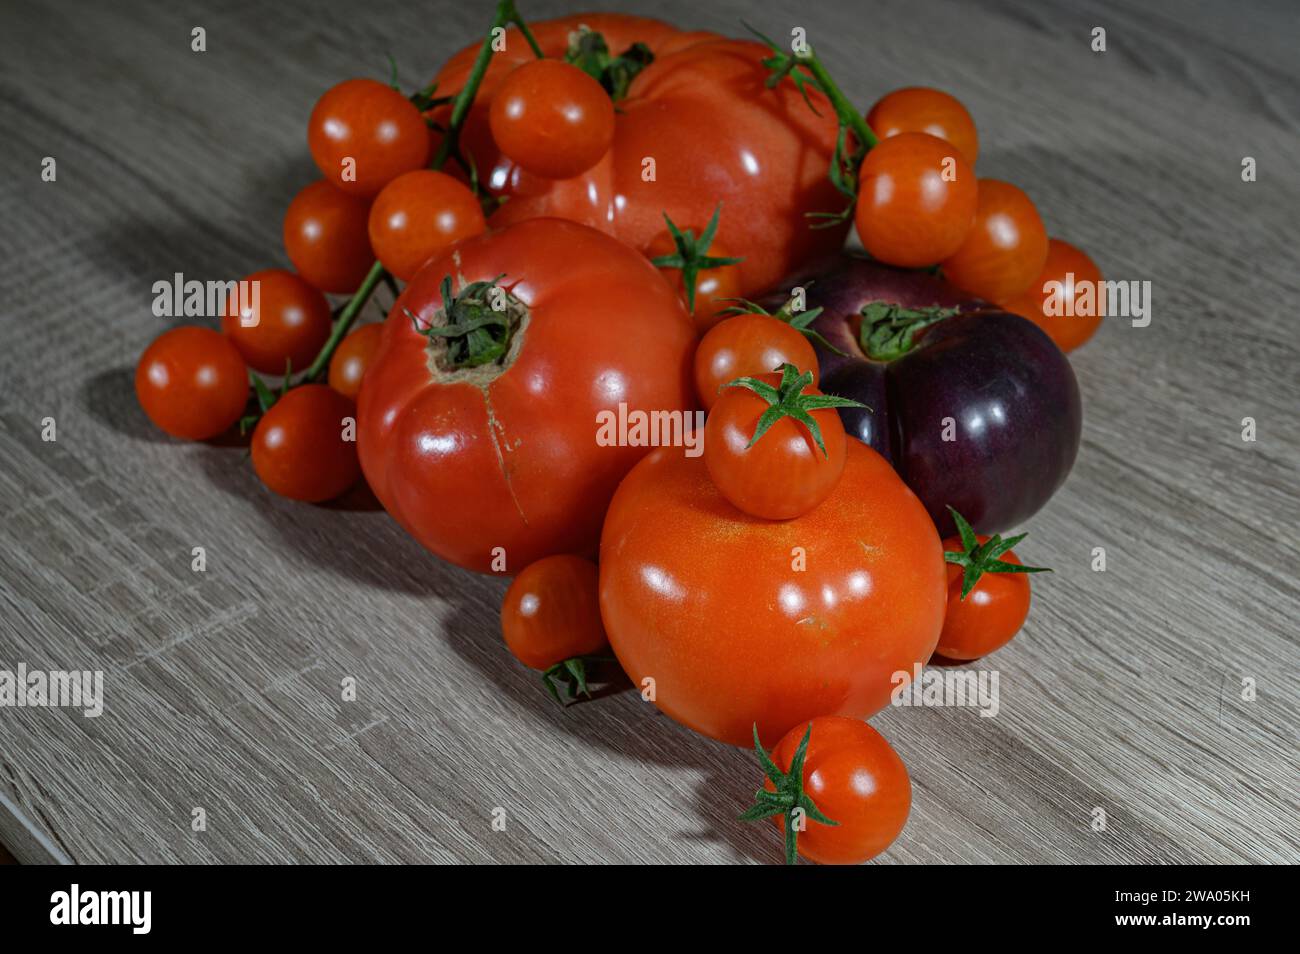 A group a bunch of whole raw tomatoes of several different types, blue, red, cherry tomatoes and a large pink tomato on a wooden table Stock Photo